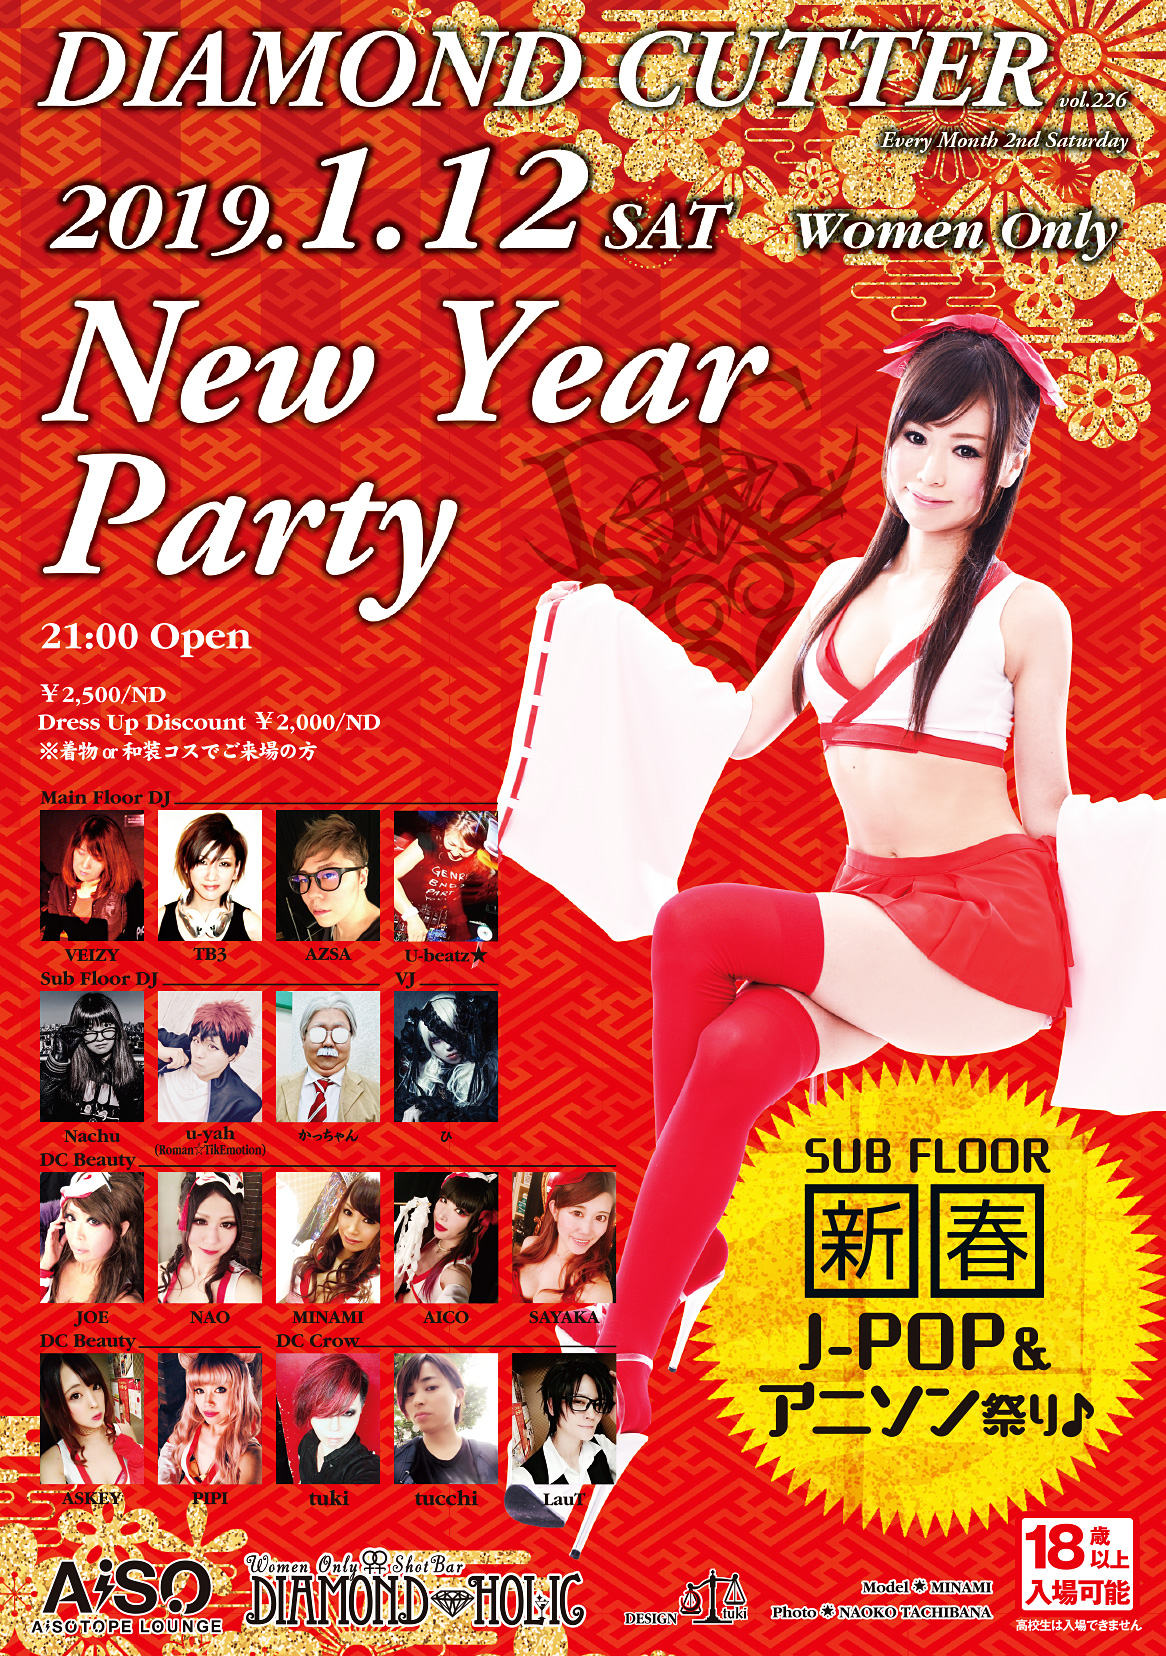 DIAMOND CUTTER 　New Year Party